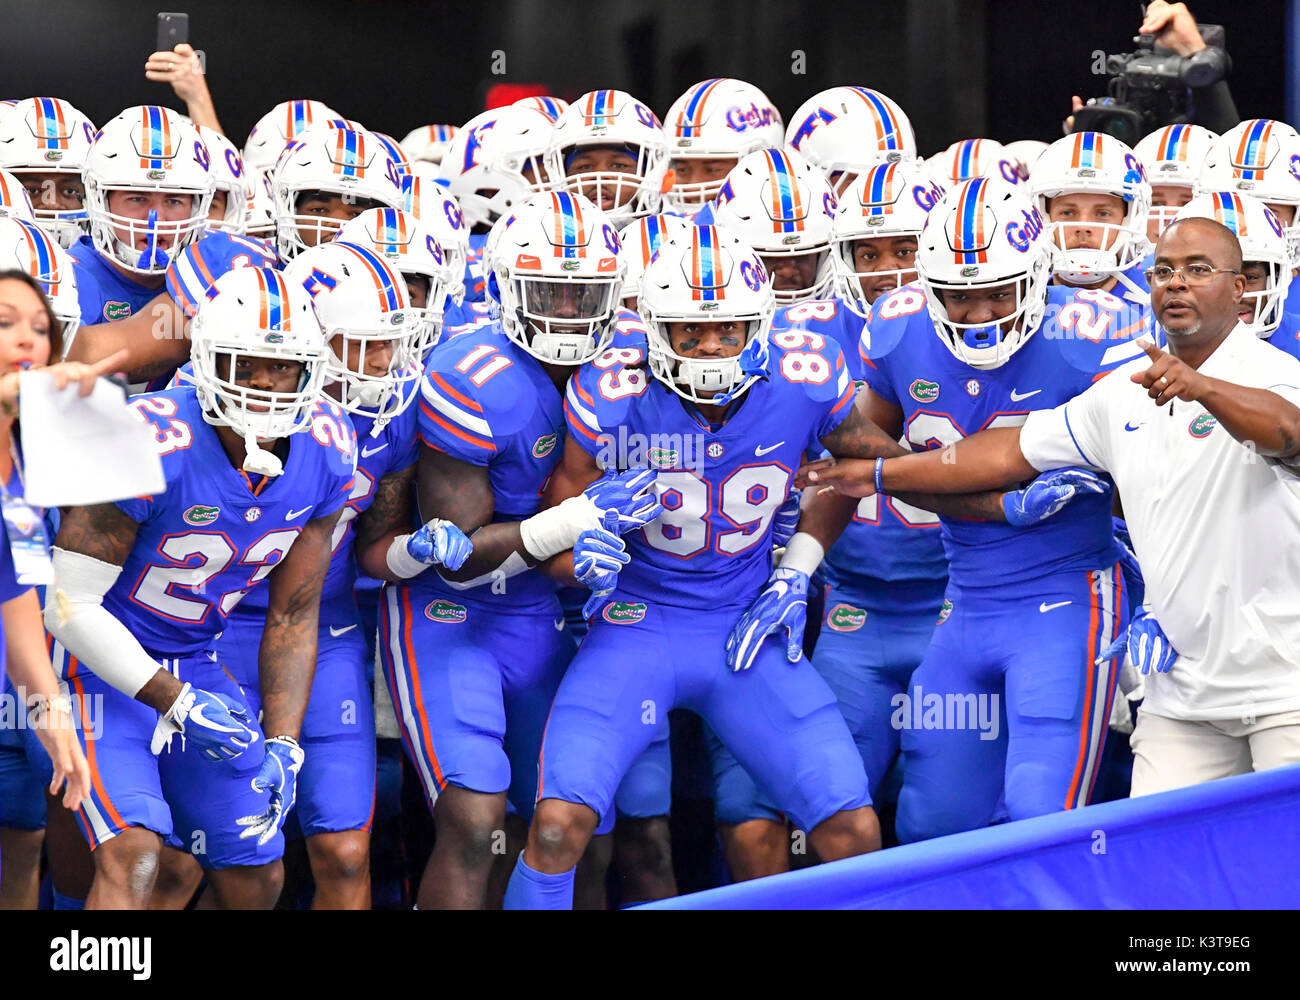 September 02, 2017: The Florida Gators football team prepares to enter the field before the Advocare Classic NCAA Football game between the University of Michigan Wolverines and the University of Florida Gators at AT&T Stadium in Arlington, TX Michigan defeated Florida 33-17 Albert Pena/CSM Stock Photo